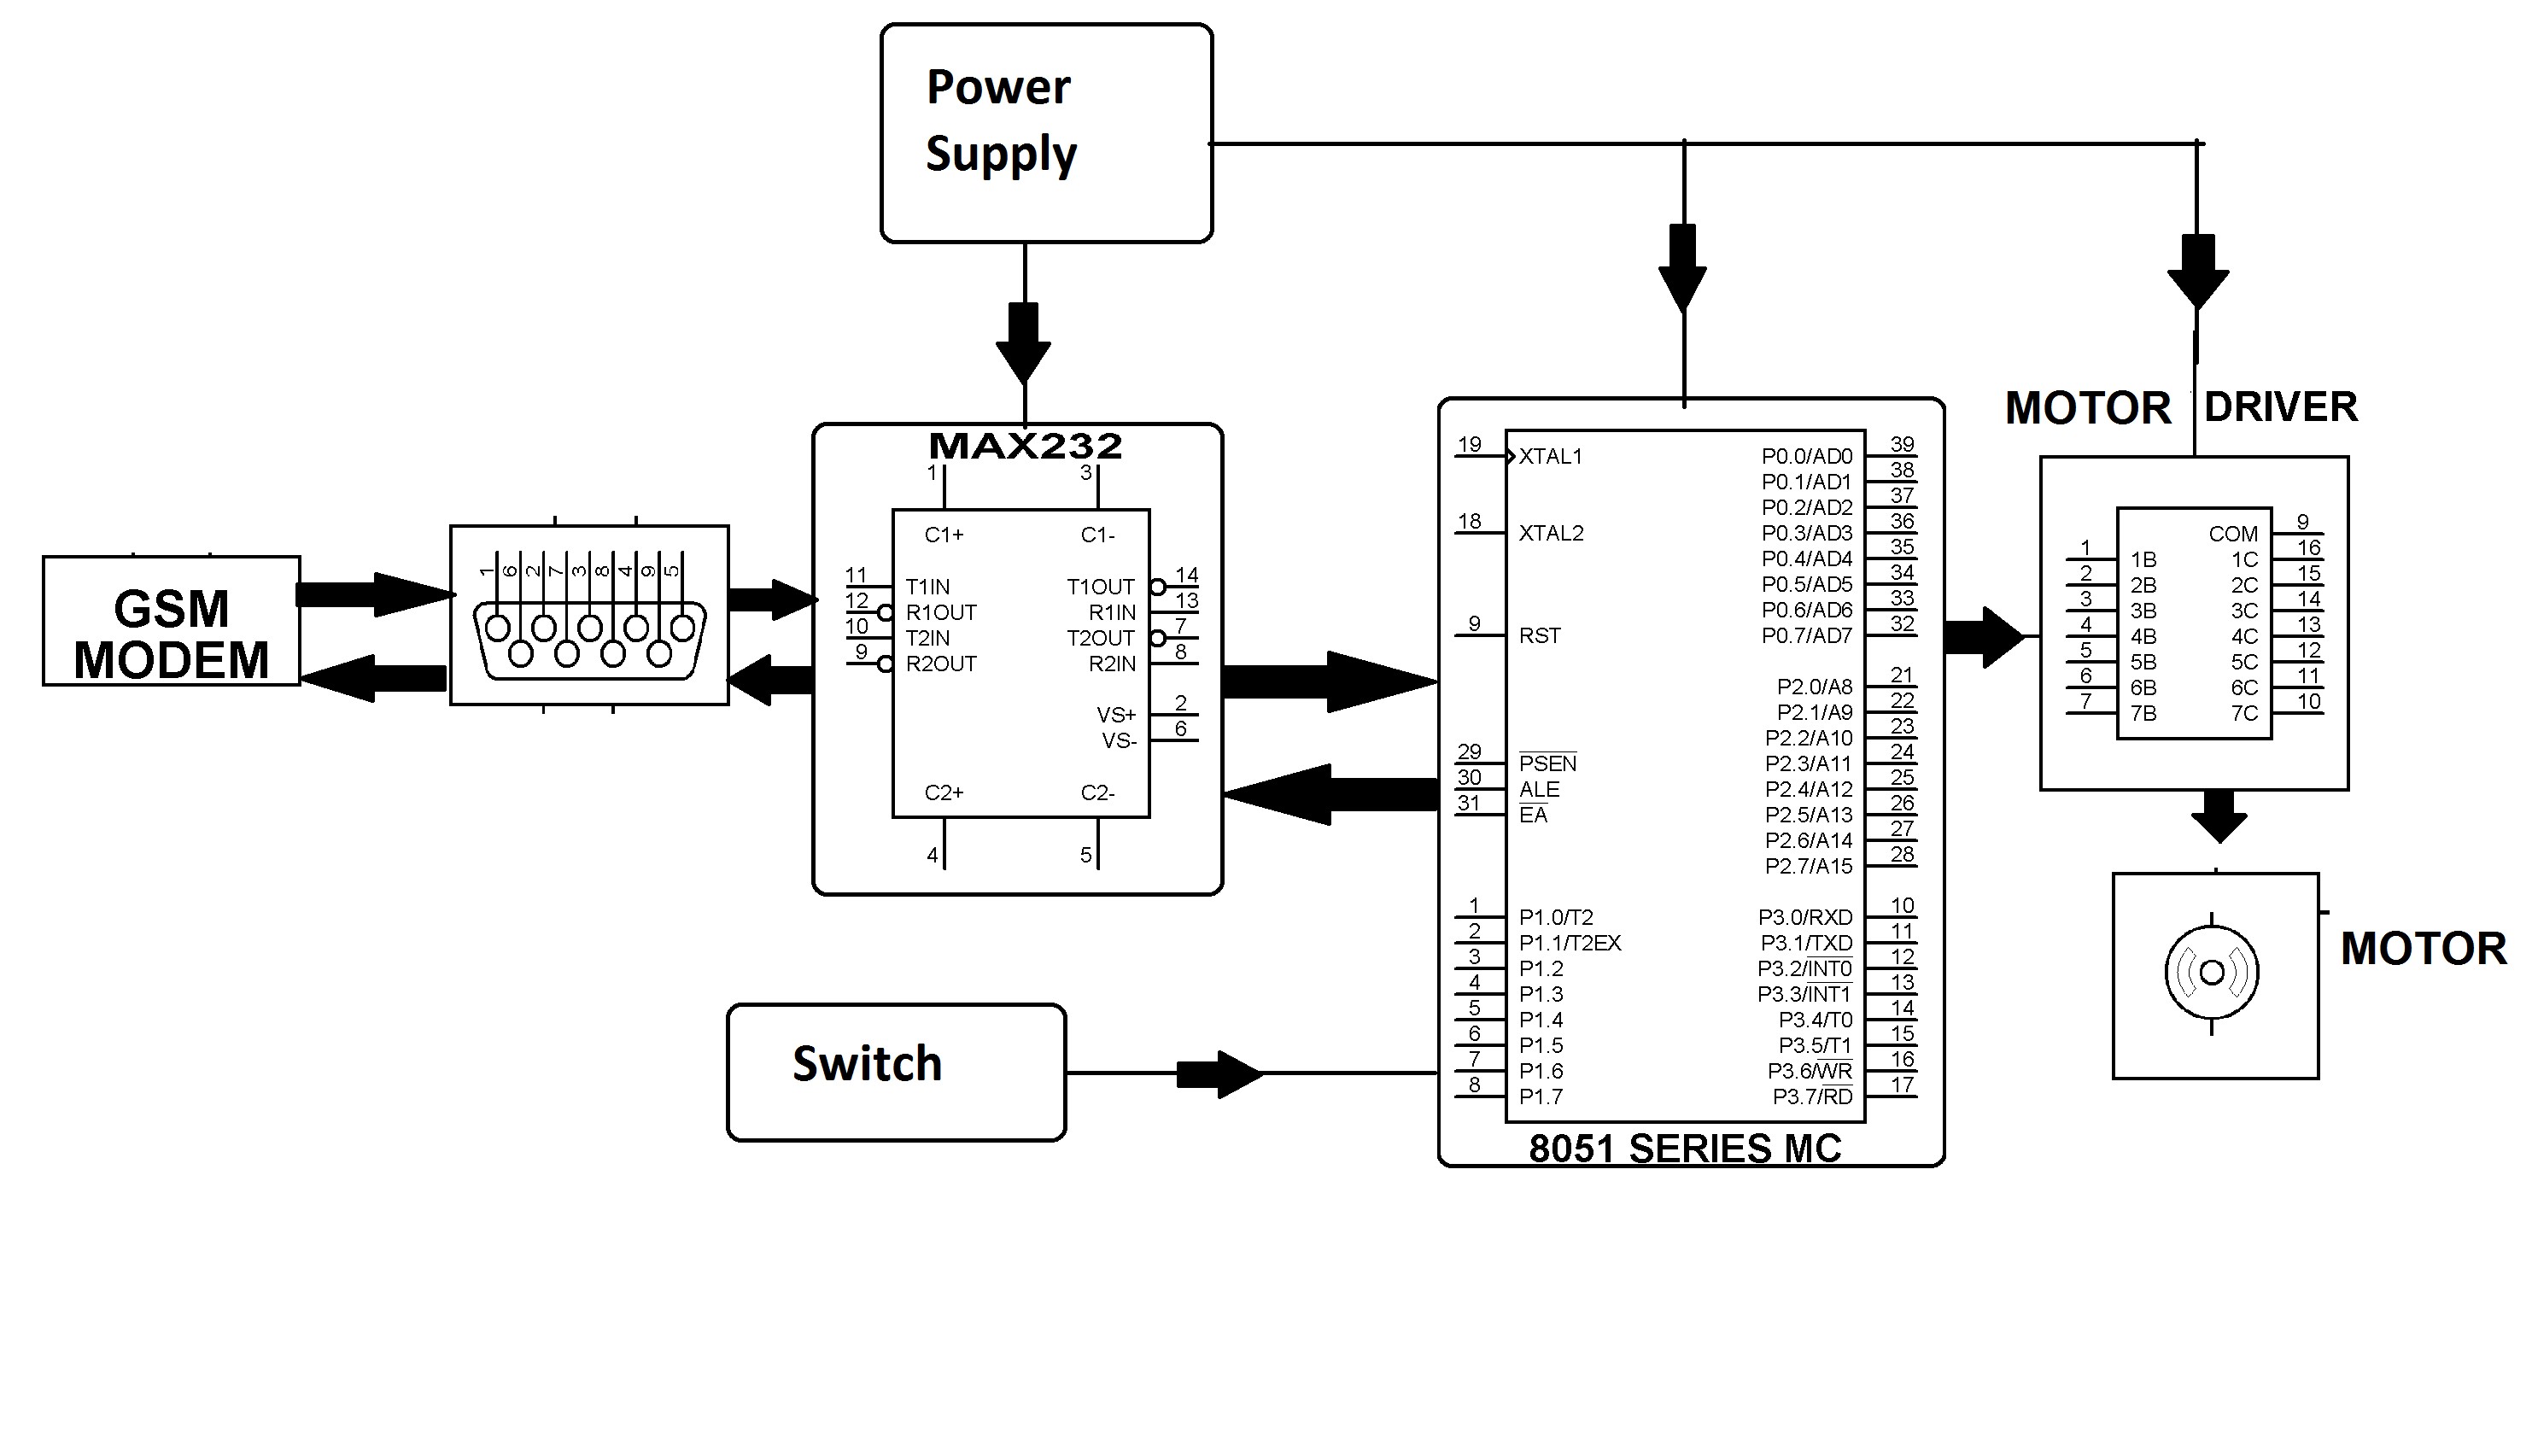 Engine Control Unit Block Diagram Vehicle theft Detection Notification and Remote Engine Locking Of Engine Control Unit Block Diagram